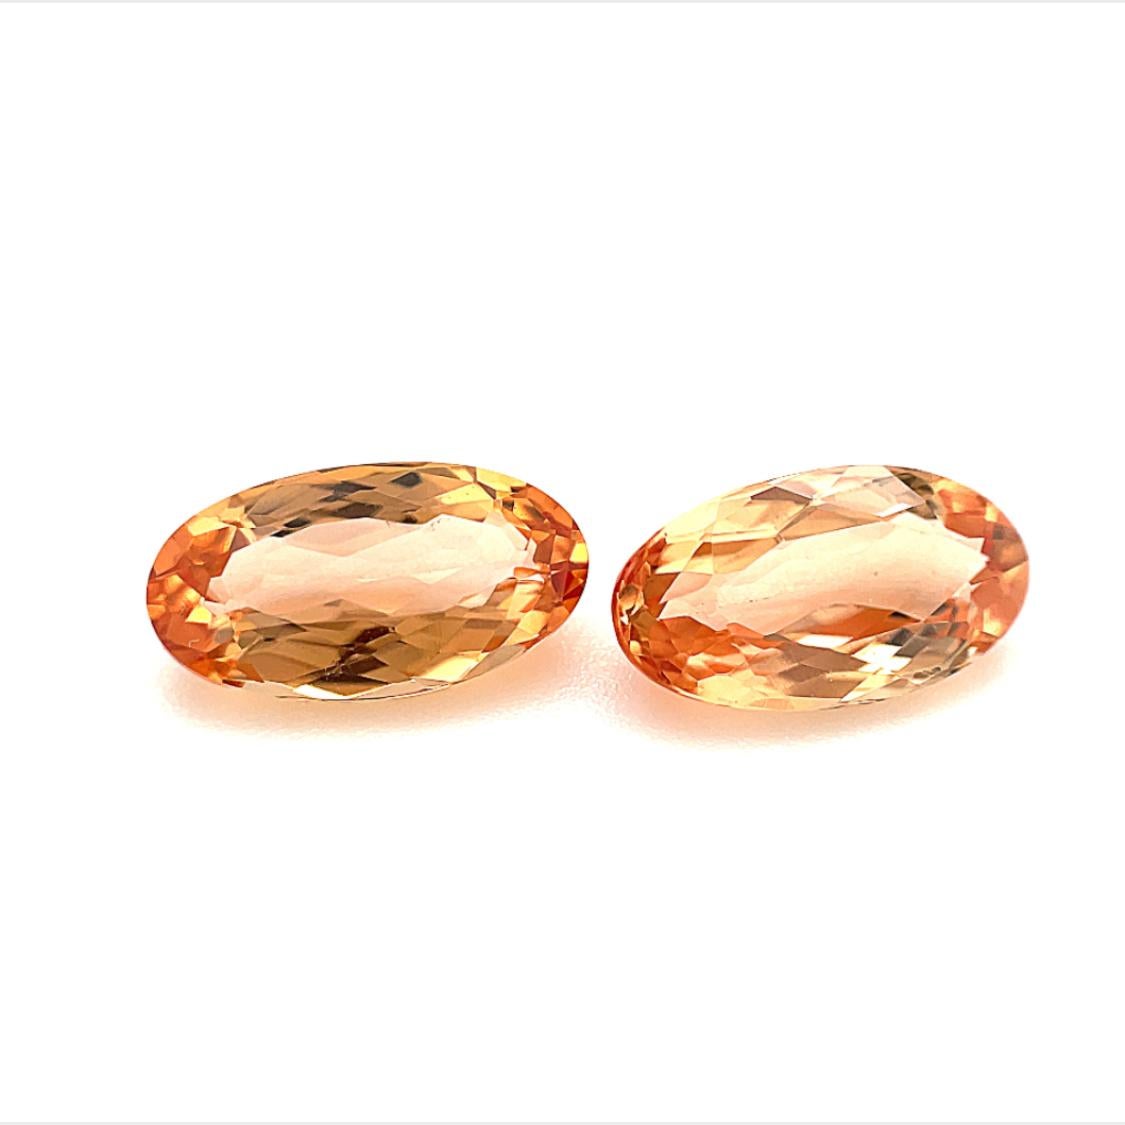 Oval Cut 3.35 Carat Total Loose Unmounted Unset Pair of Oval Precious Topaz Gemstones